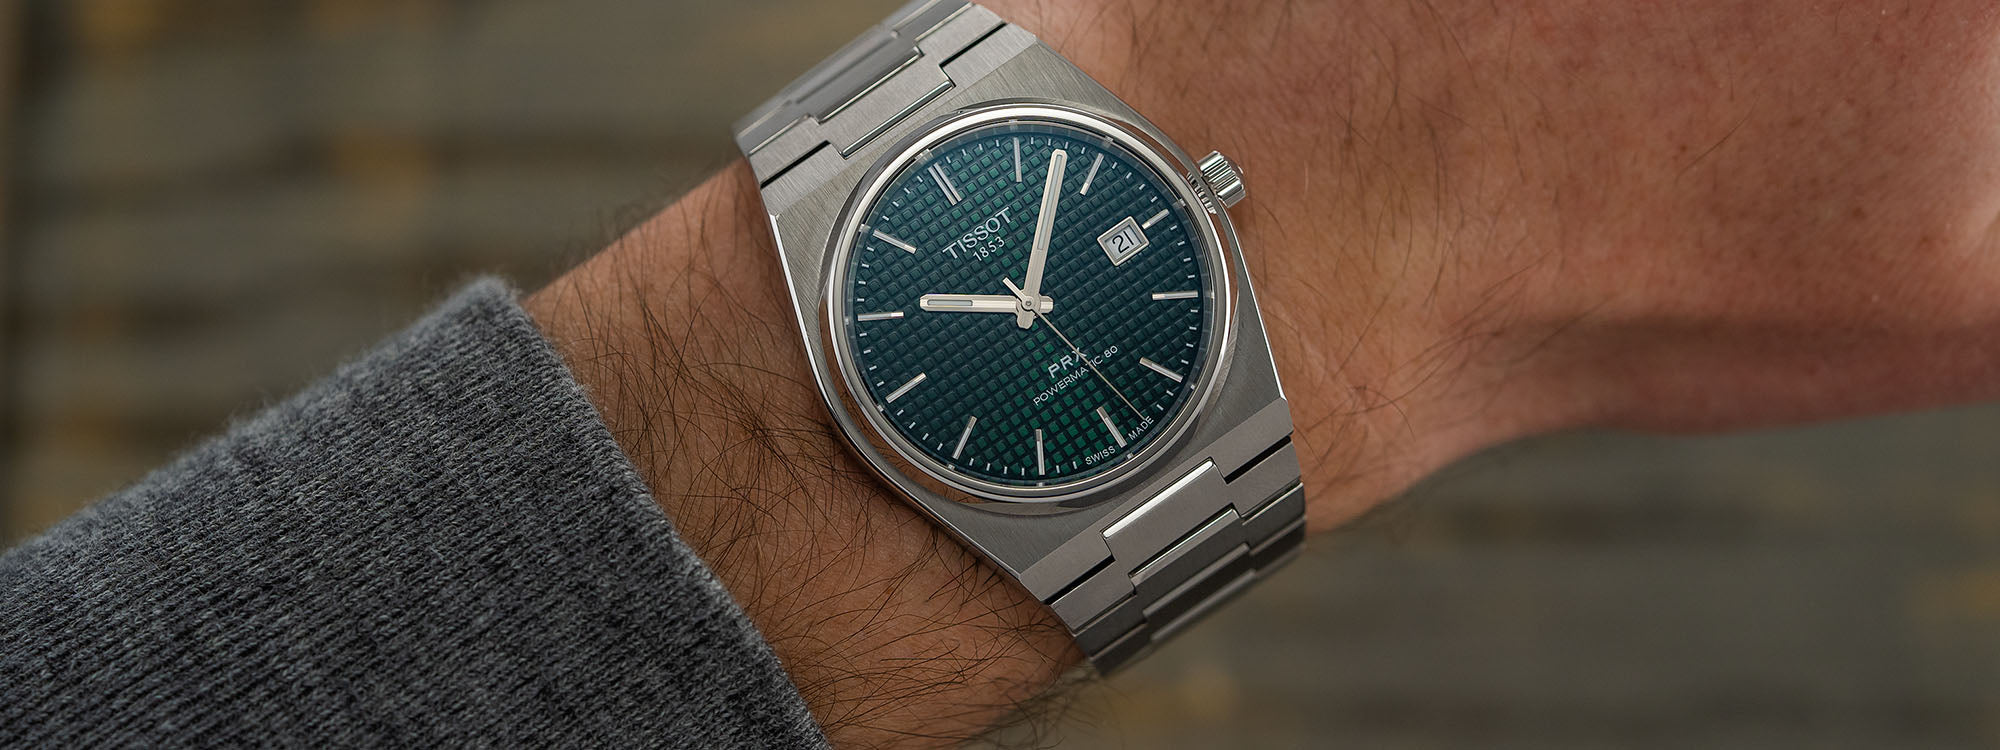 This Is The Best Entry Level Watch - Are Cheap Watches Worth It